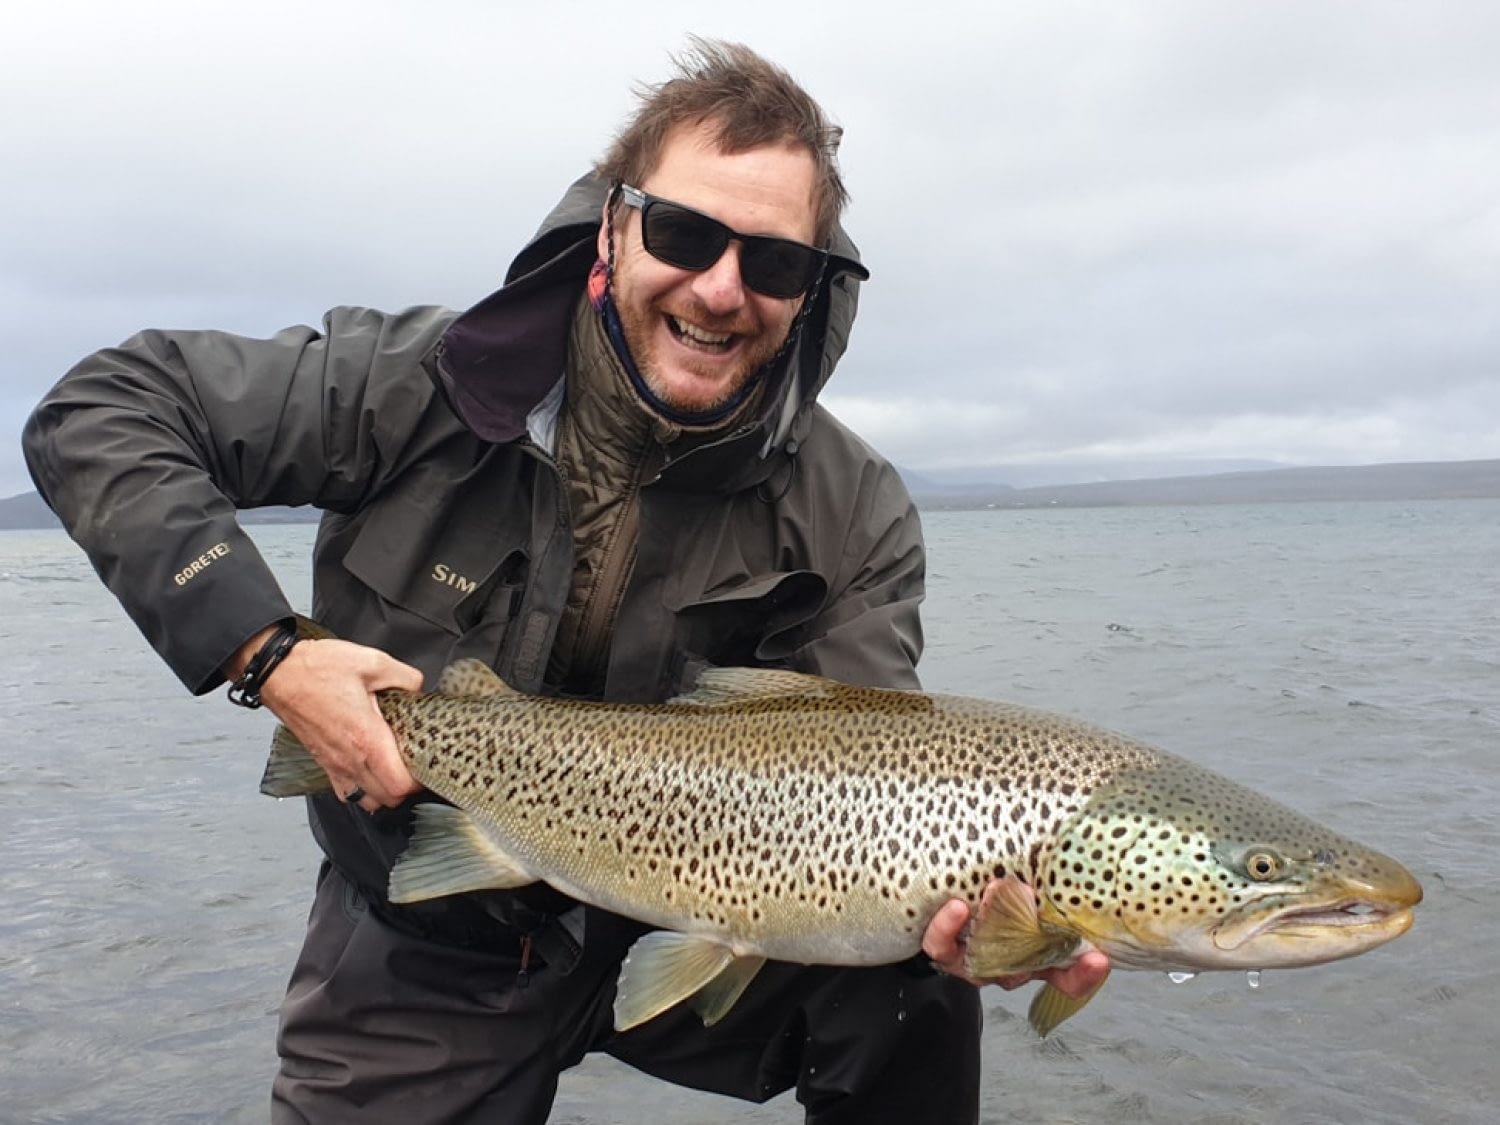 The perfect catch: a beautiful Arctic Char from Thingvellir National Park